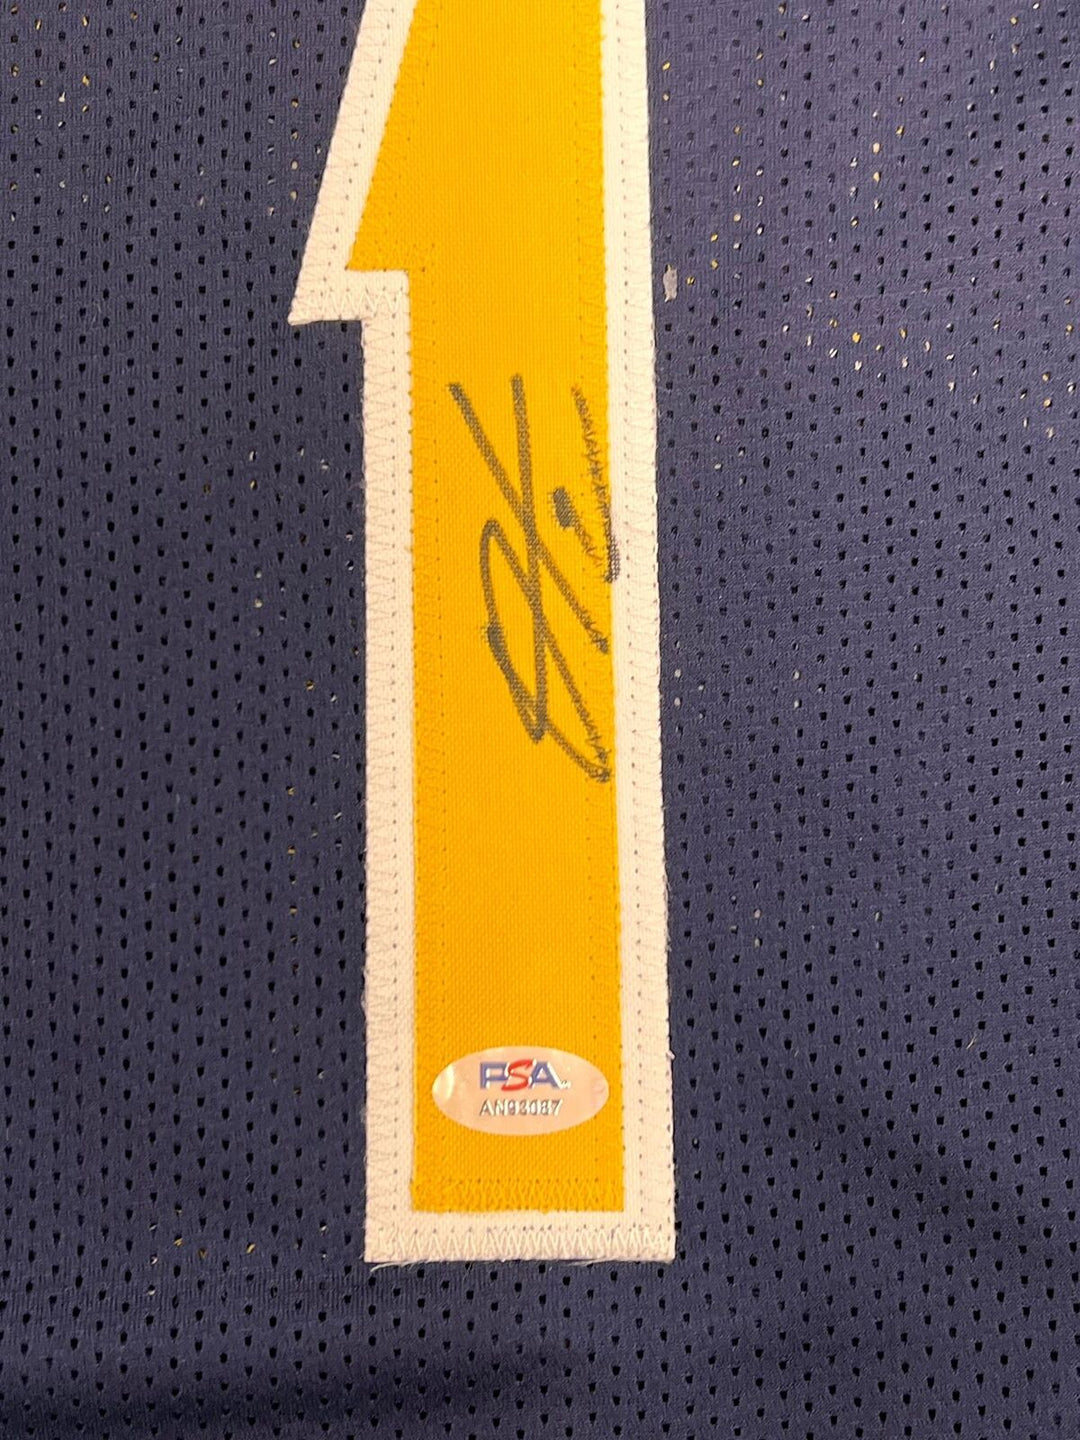 Obi Toppin signed jersey PSA/DNA Indiana Pacers Autographed Image 2